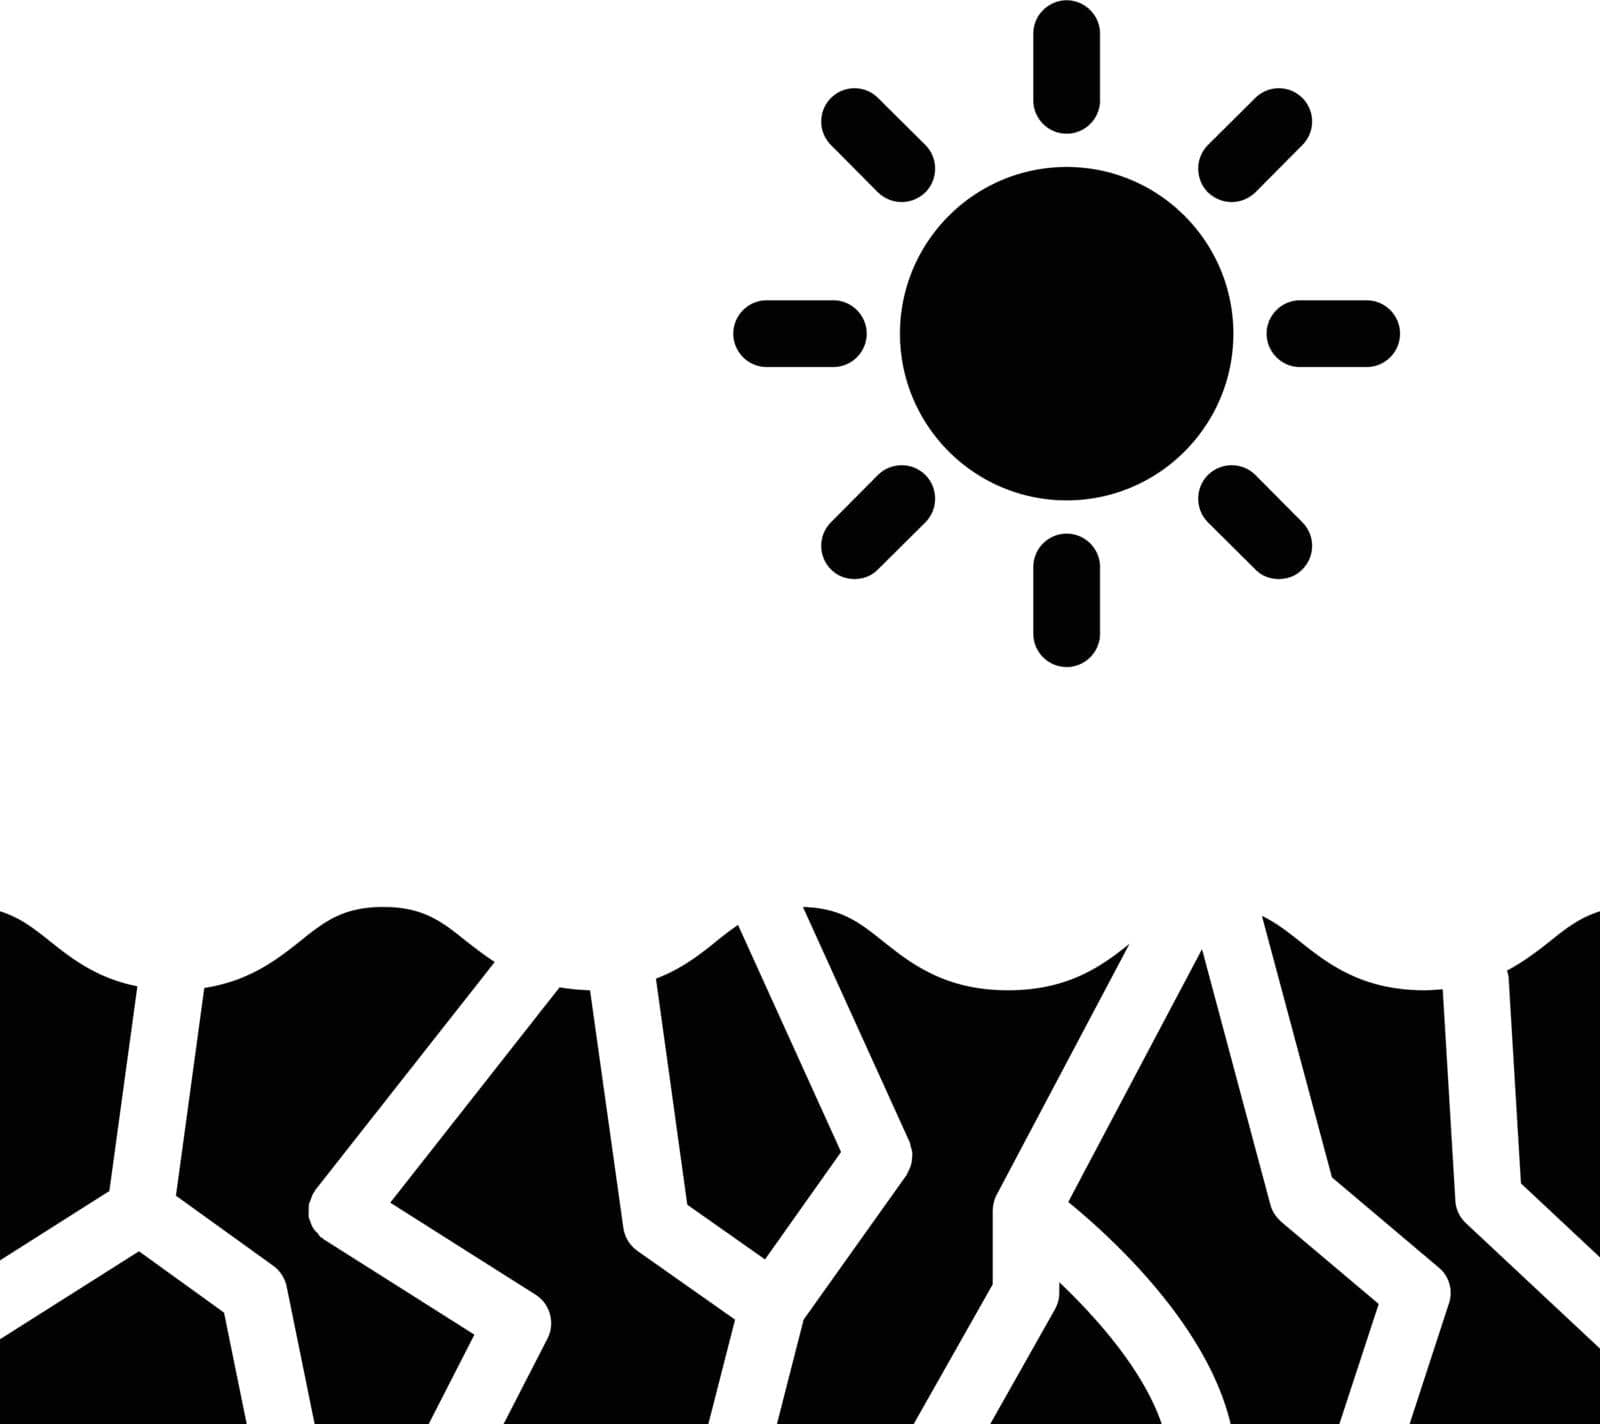 sun Vector illustration on a transparent background. Premium quality symbols. Glyphs vector icon for concept and graphic design.